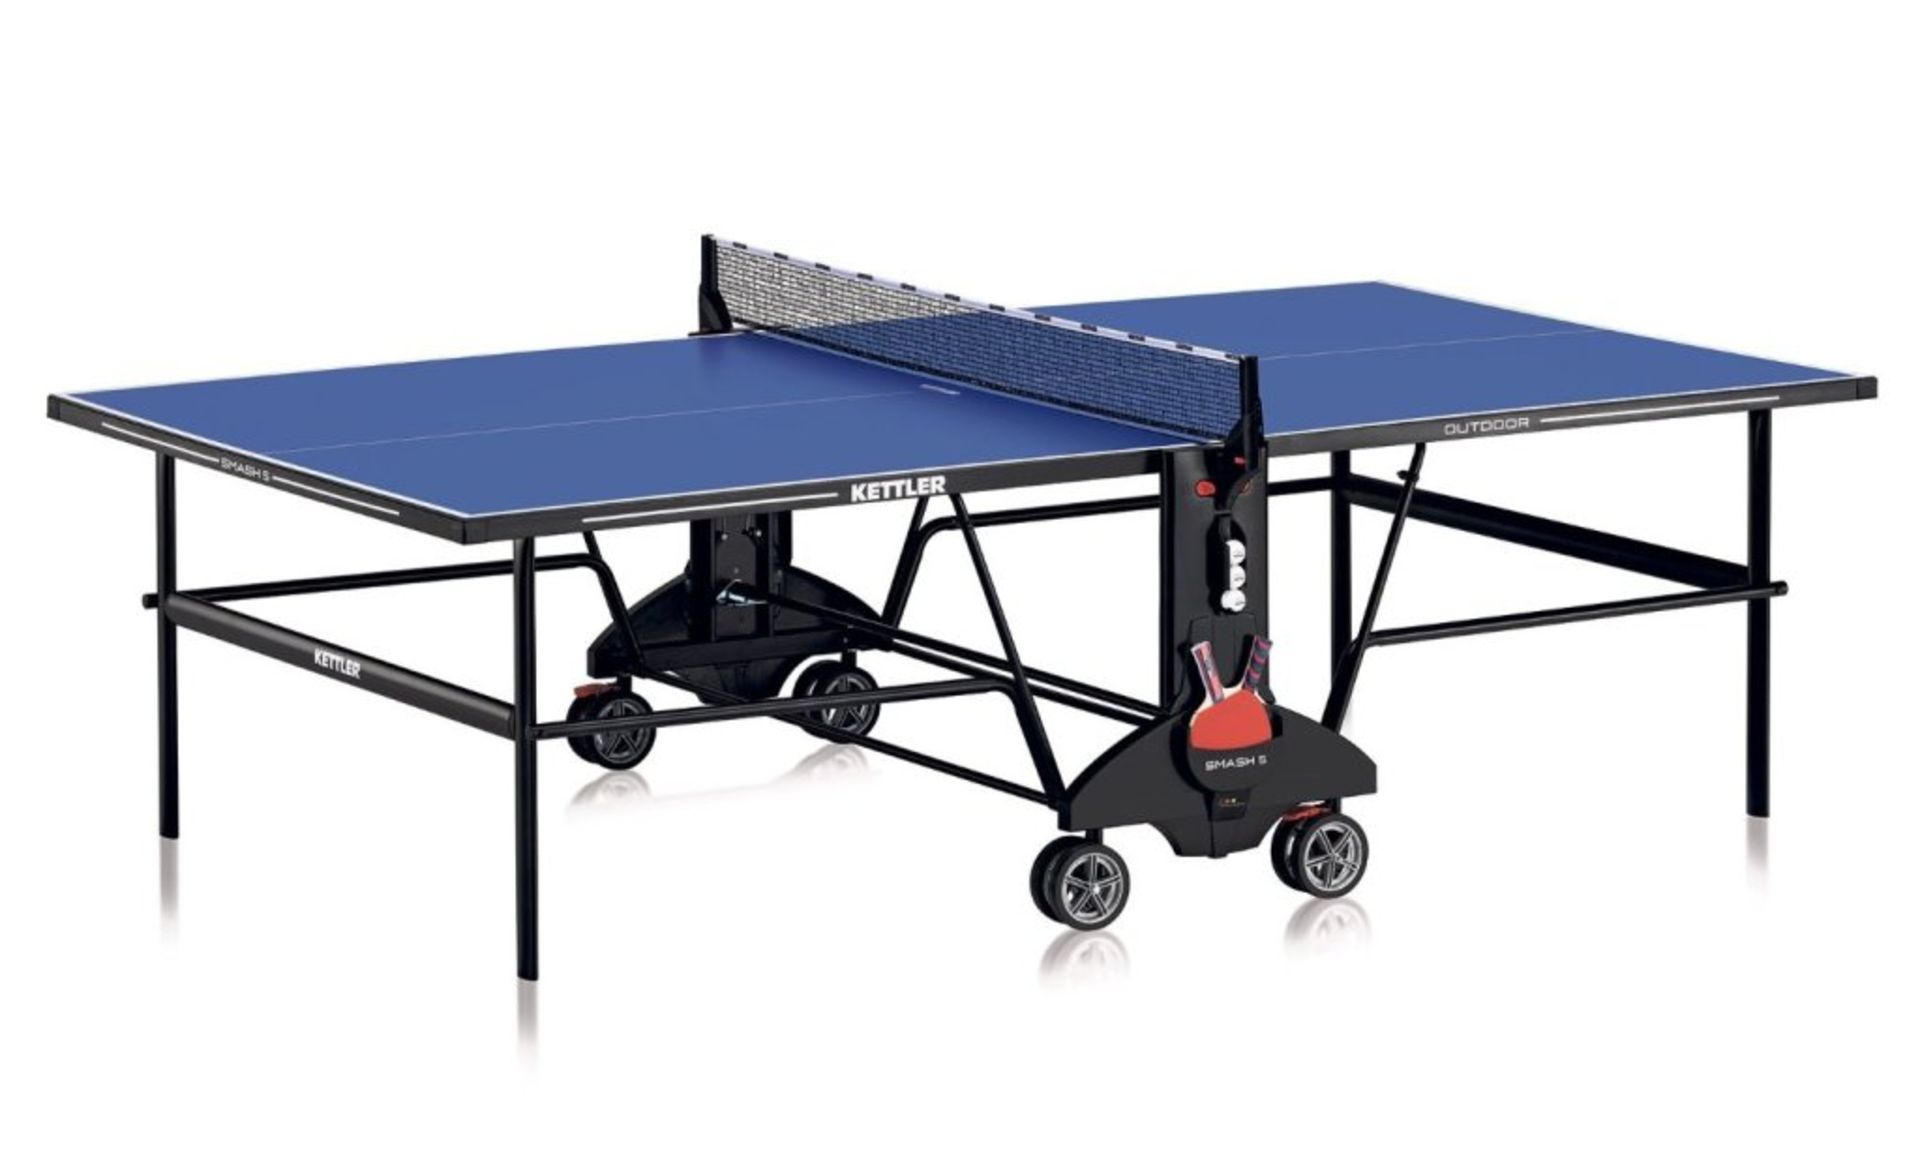 1 x BOXED KETTLER SMASH 11 OUTDOOR TENNIS TABLE RRP £650 (7180660)  *PLEASE NOTE THAT THE BID